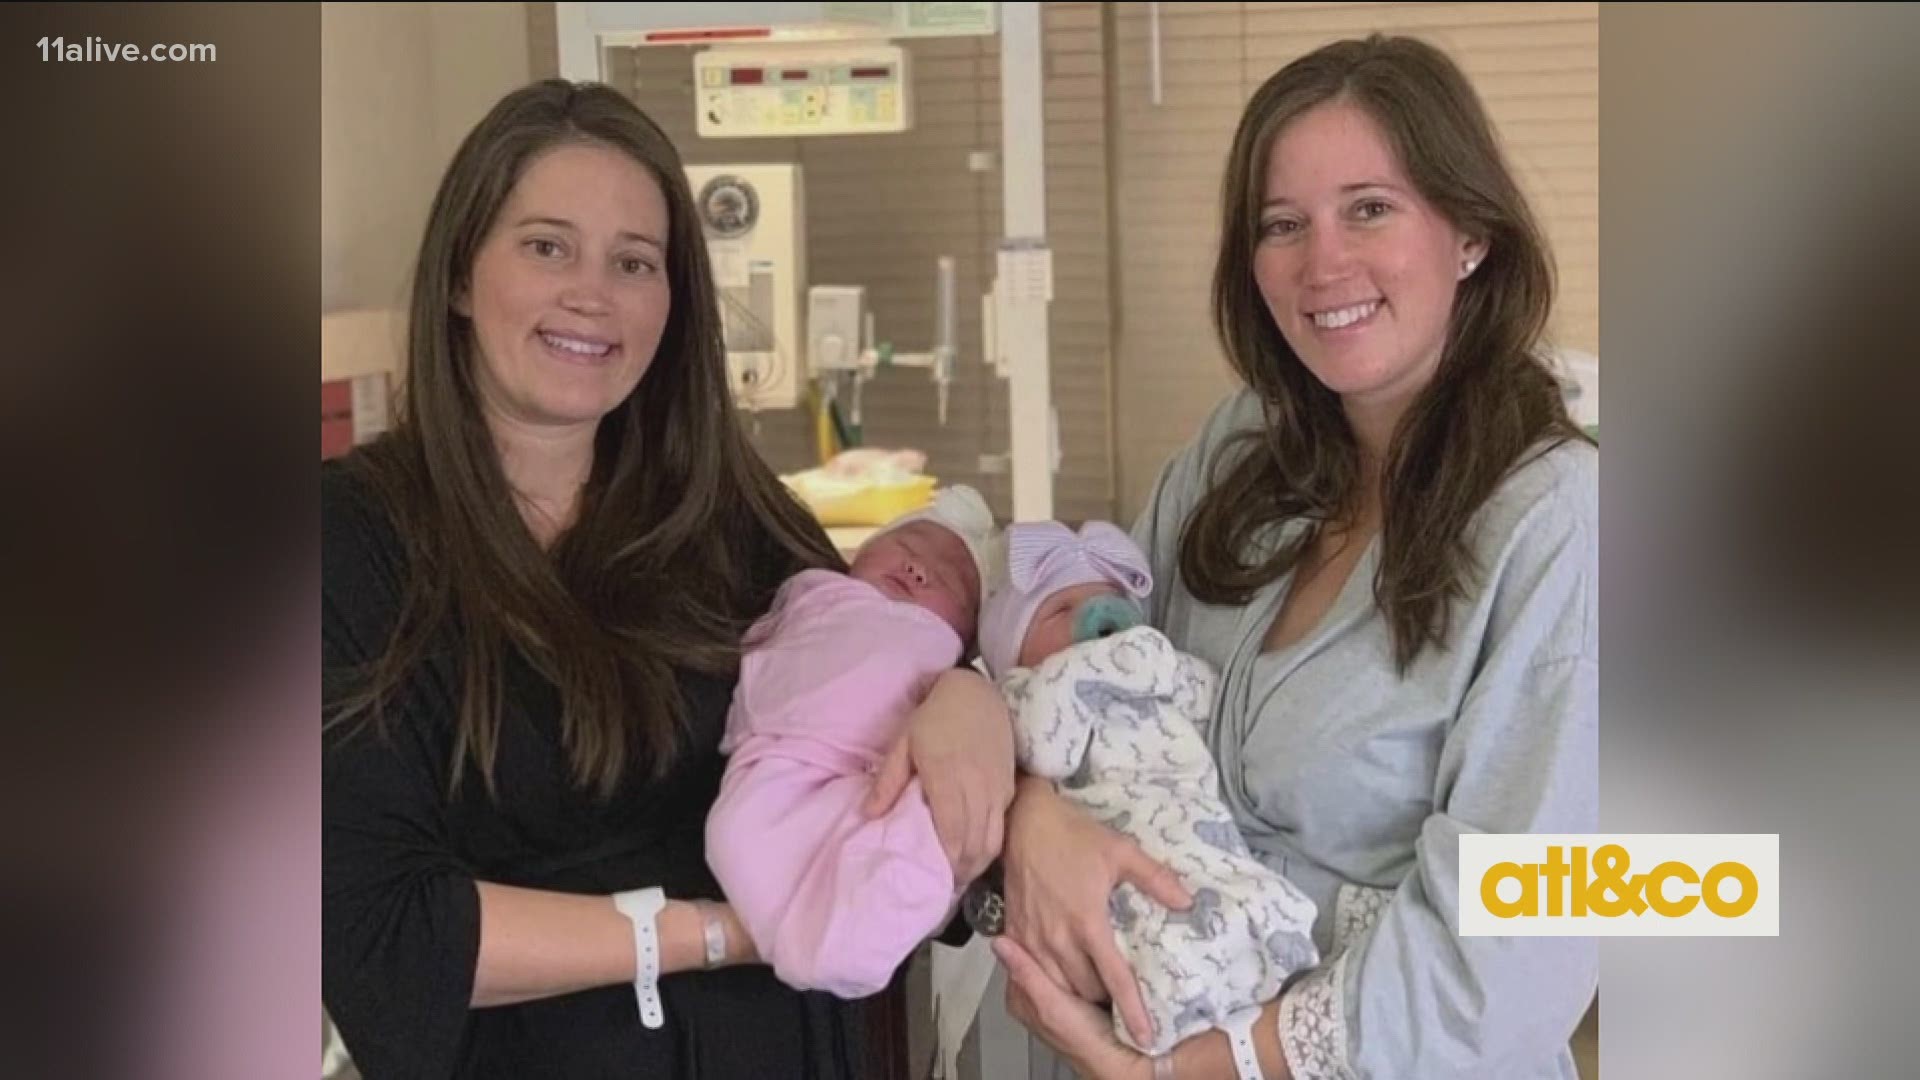 "We've done it all together!" Twin sisters and nurses Amber and Autum both gave birth to daughters on their 33rd birthday!